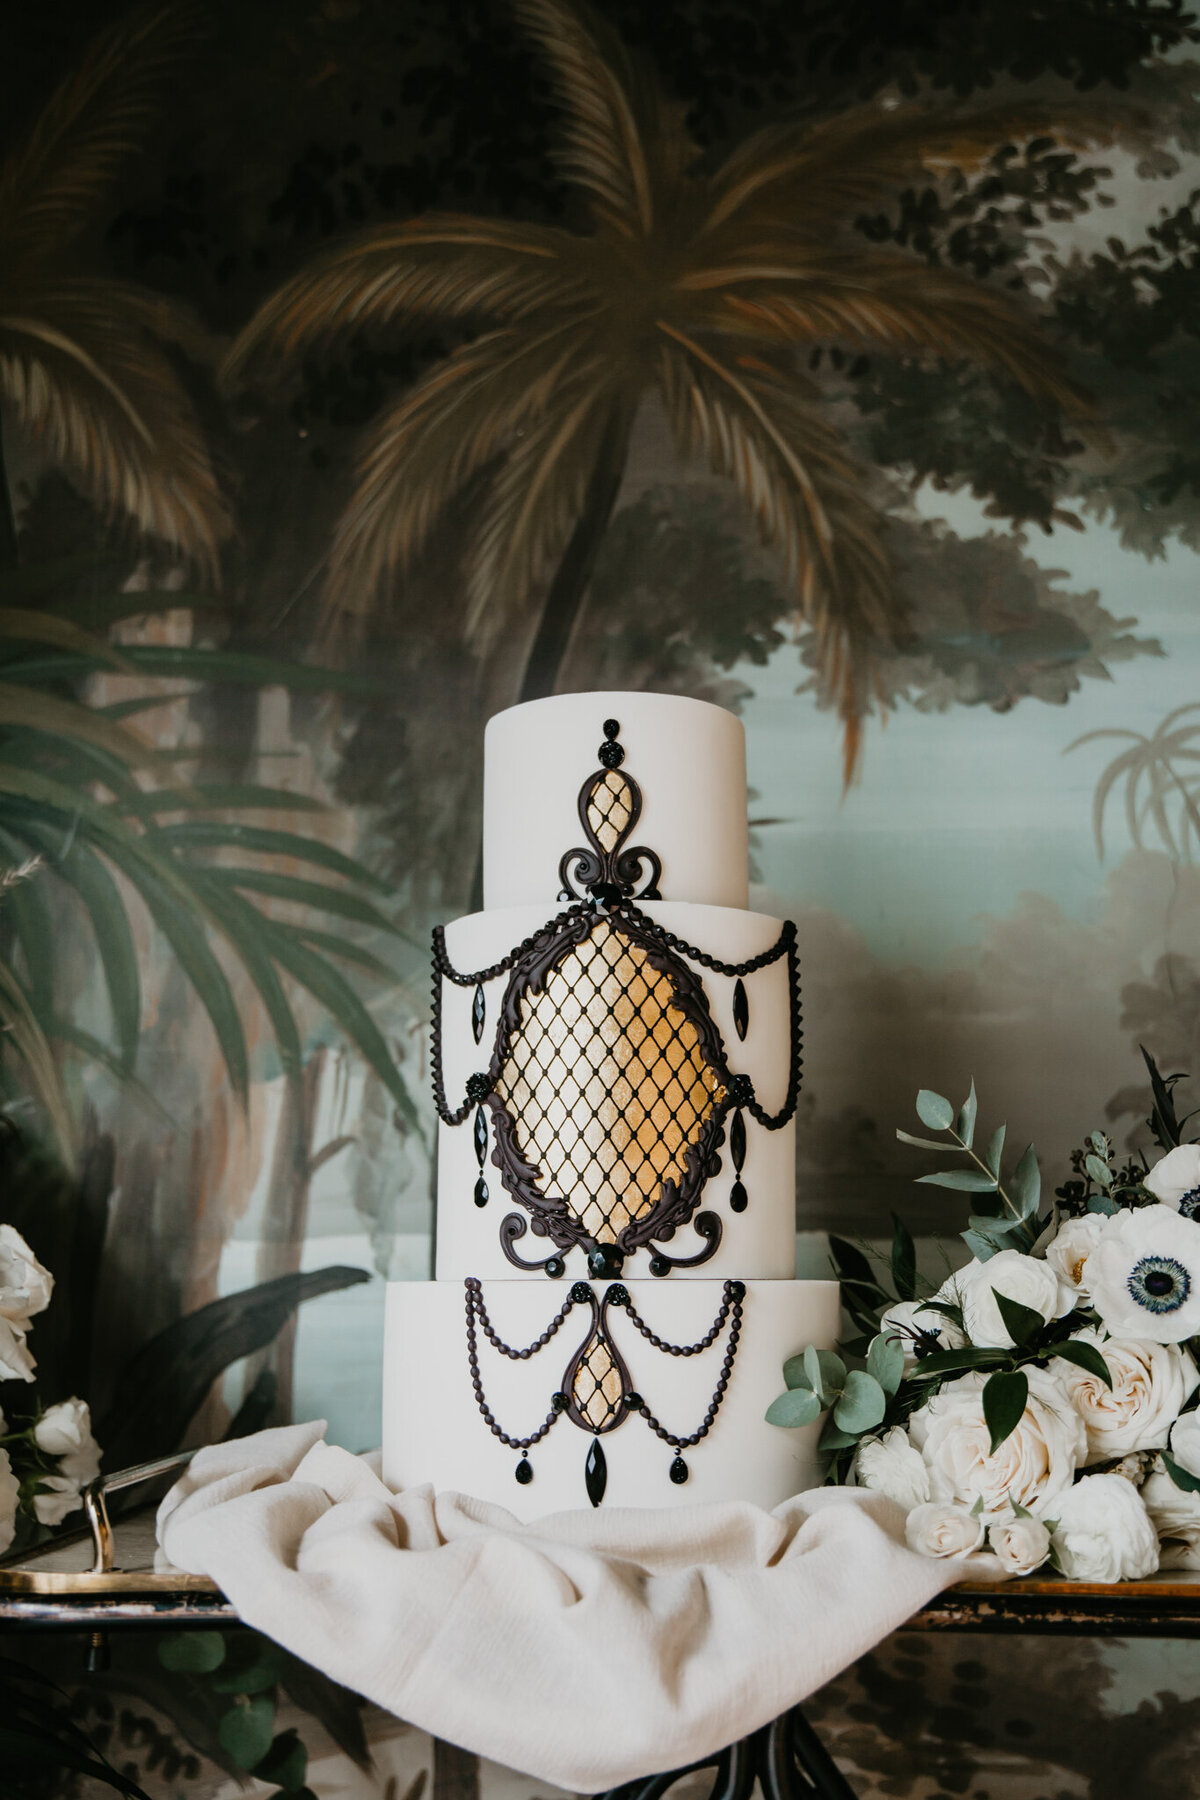 Elegant and ornate wedding cake captured by Nikki Collette Photography, adventurous and romantic wedding photographer in Red Deer, Alberta. Featured on the Bronte Bride Vendor Guide.